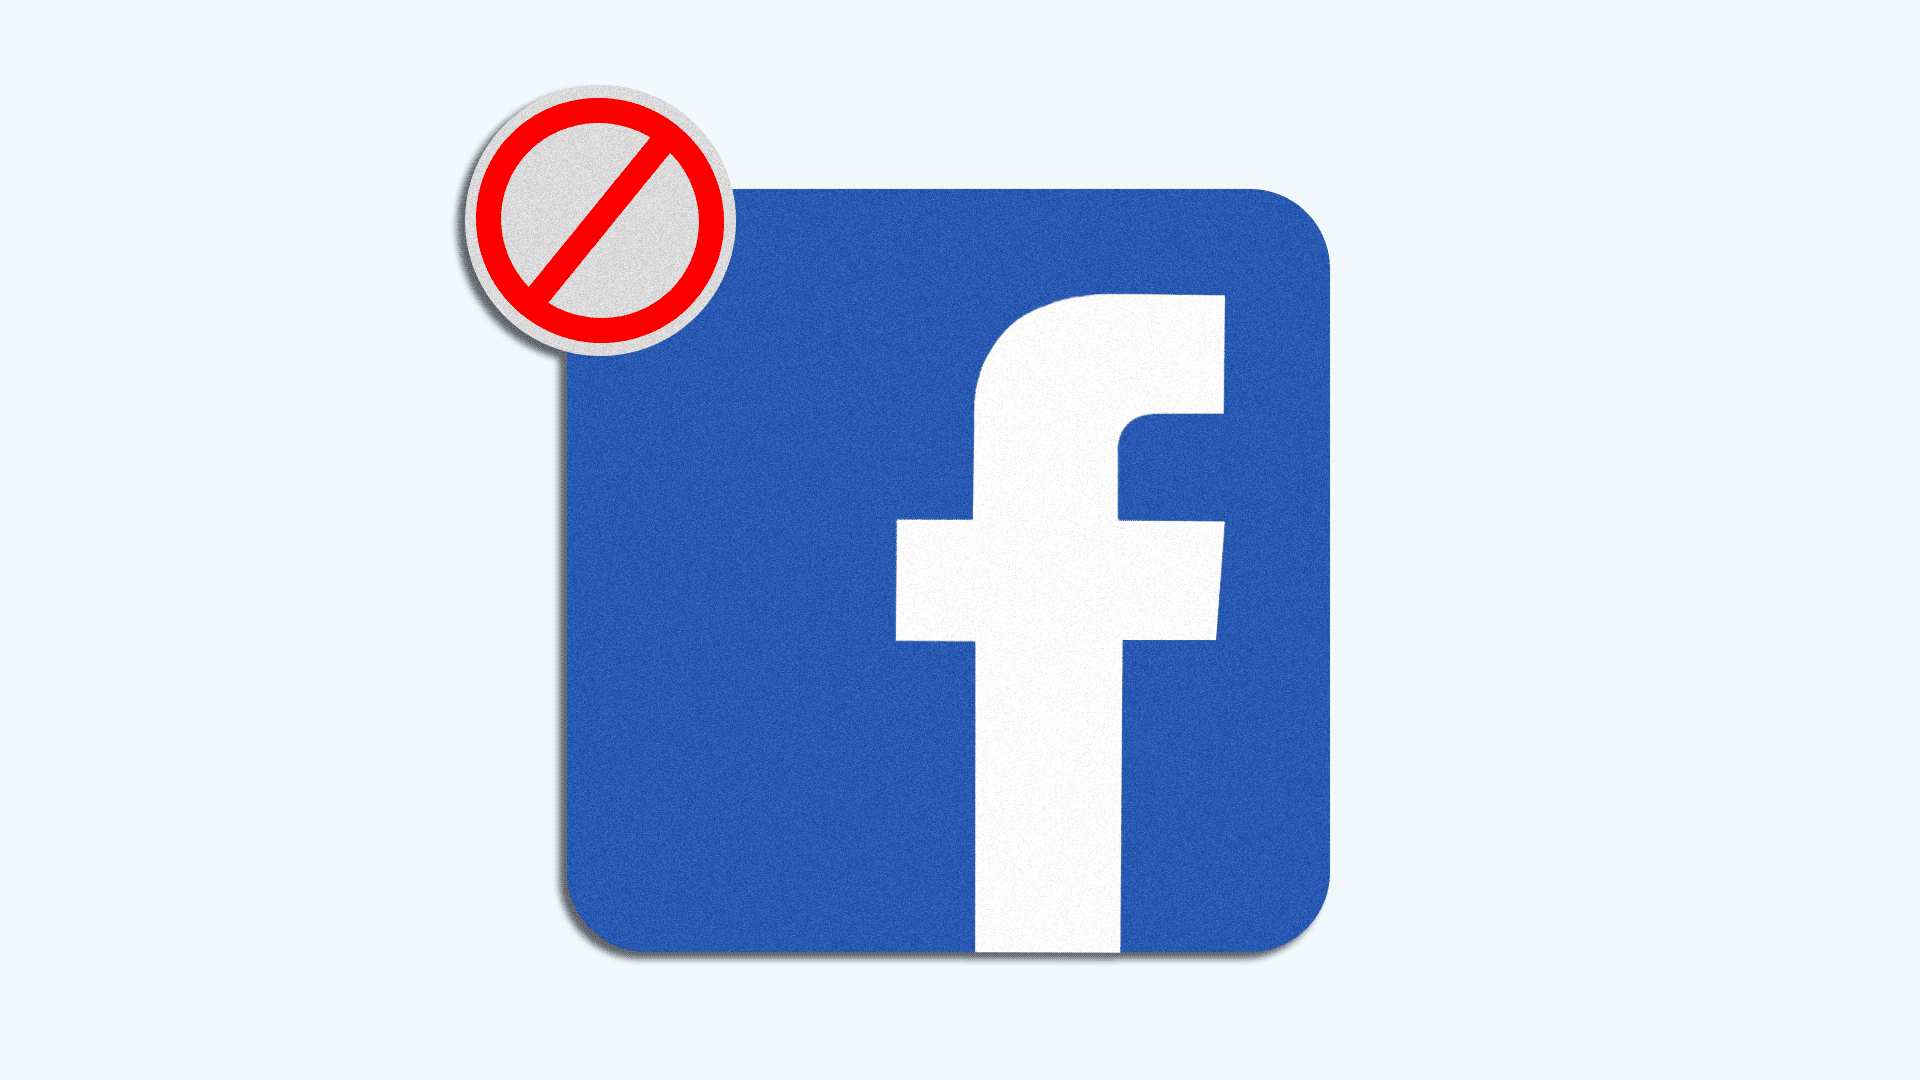 Animated GIF of a facebook AP button with a "no" symbol in the upper left corner